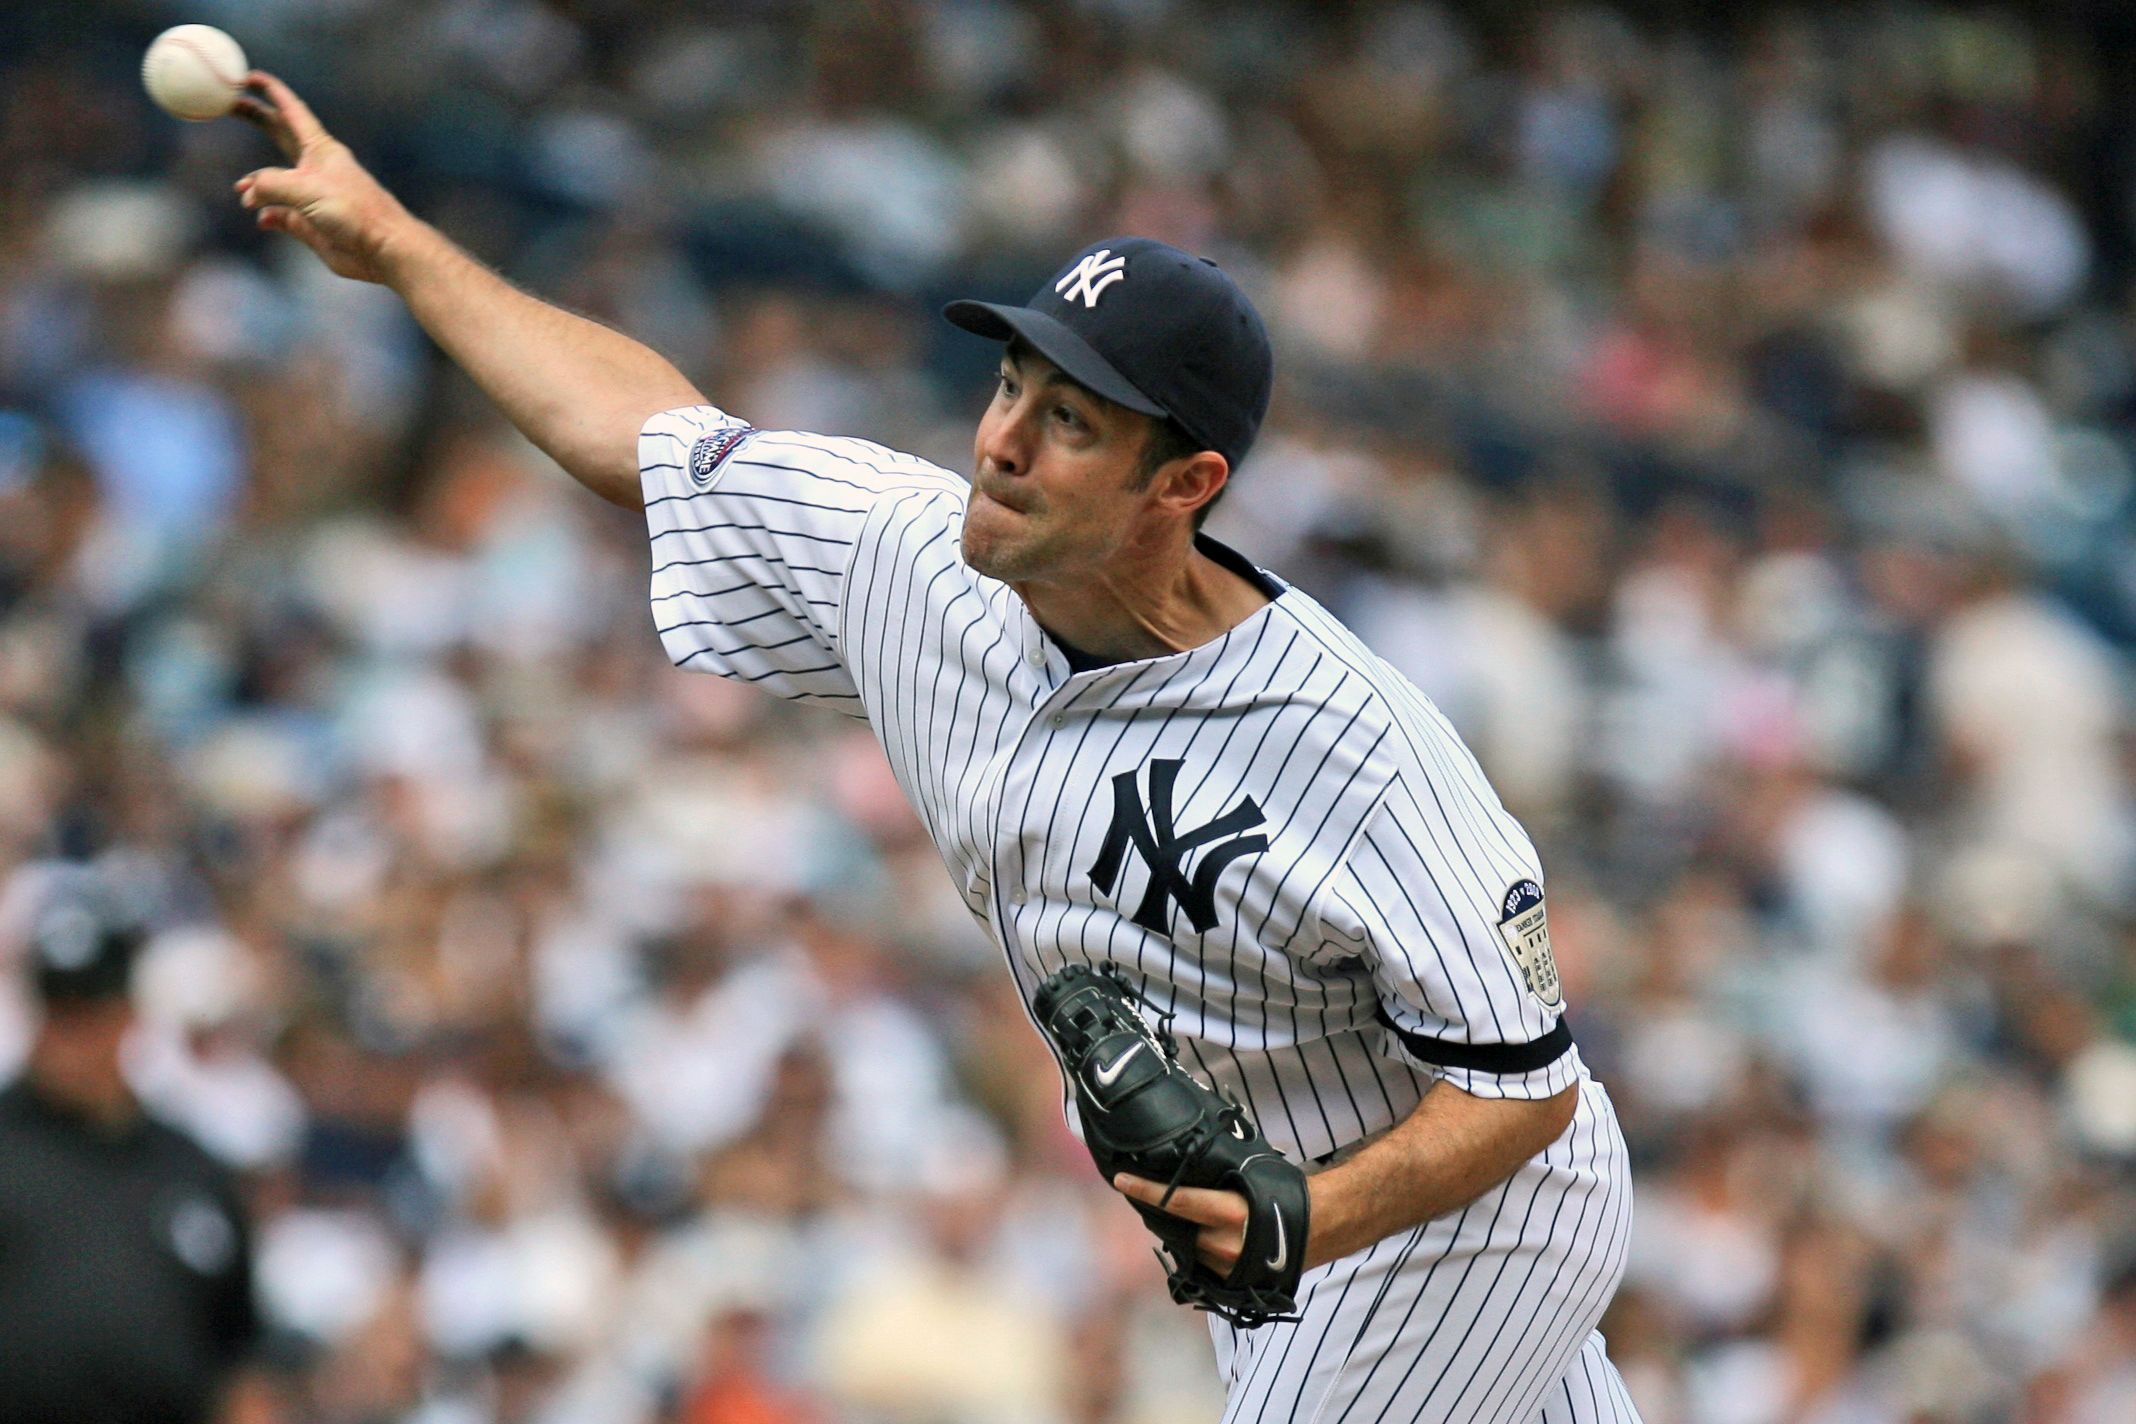 Former Yankees pitcher Mike Mussina opens 2019 Baseball Hall of